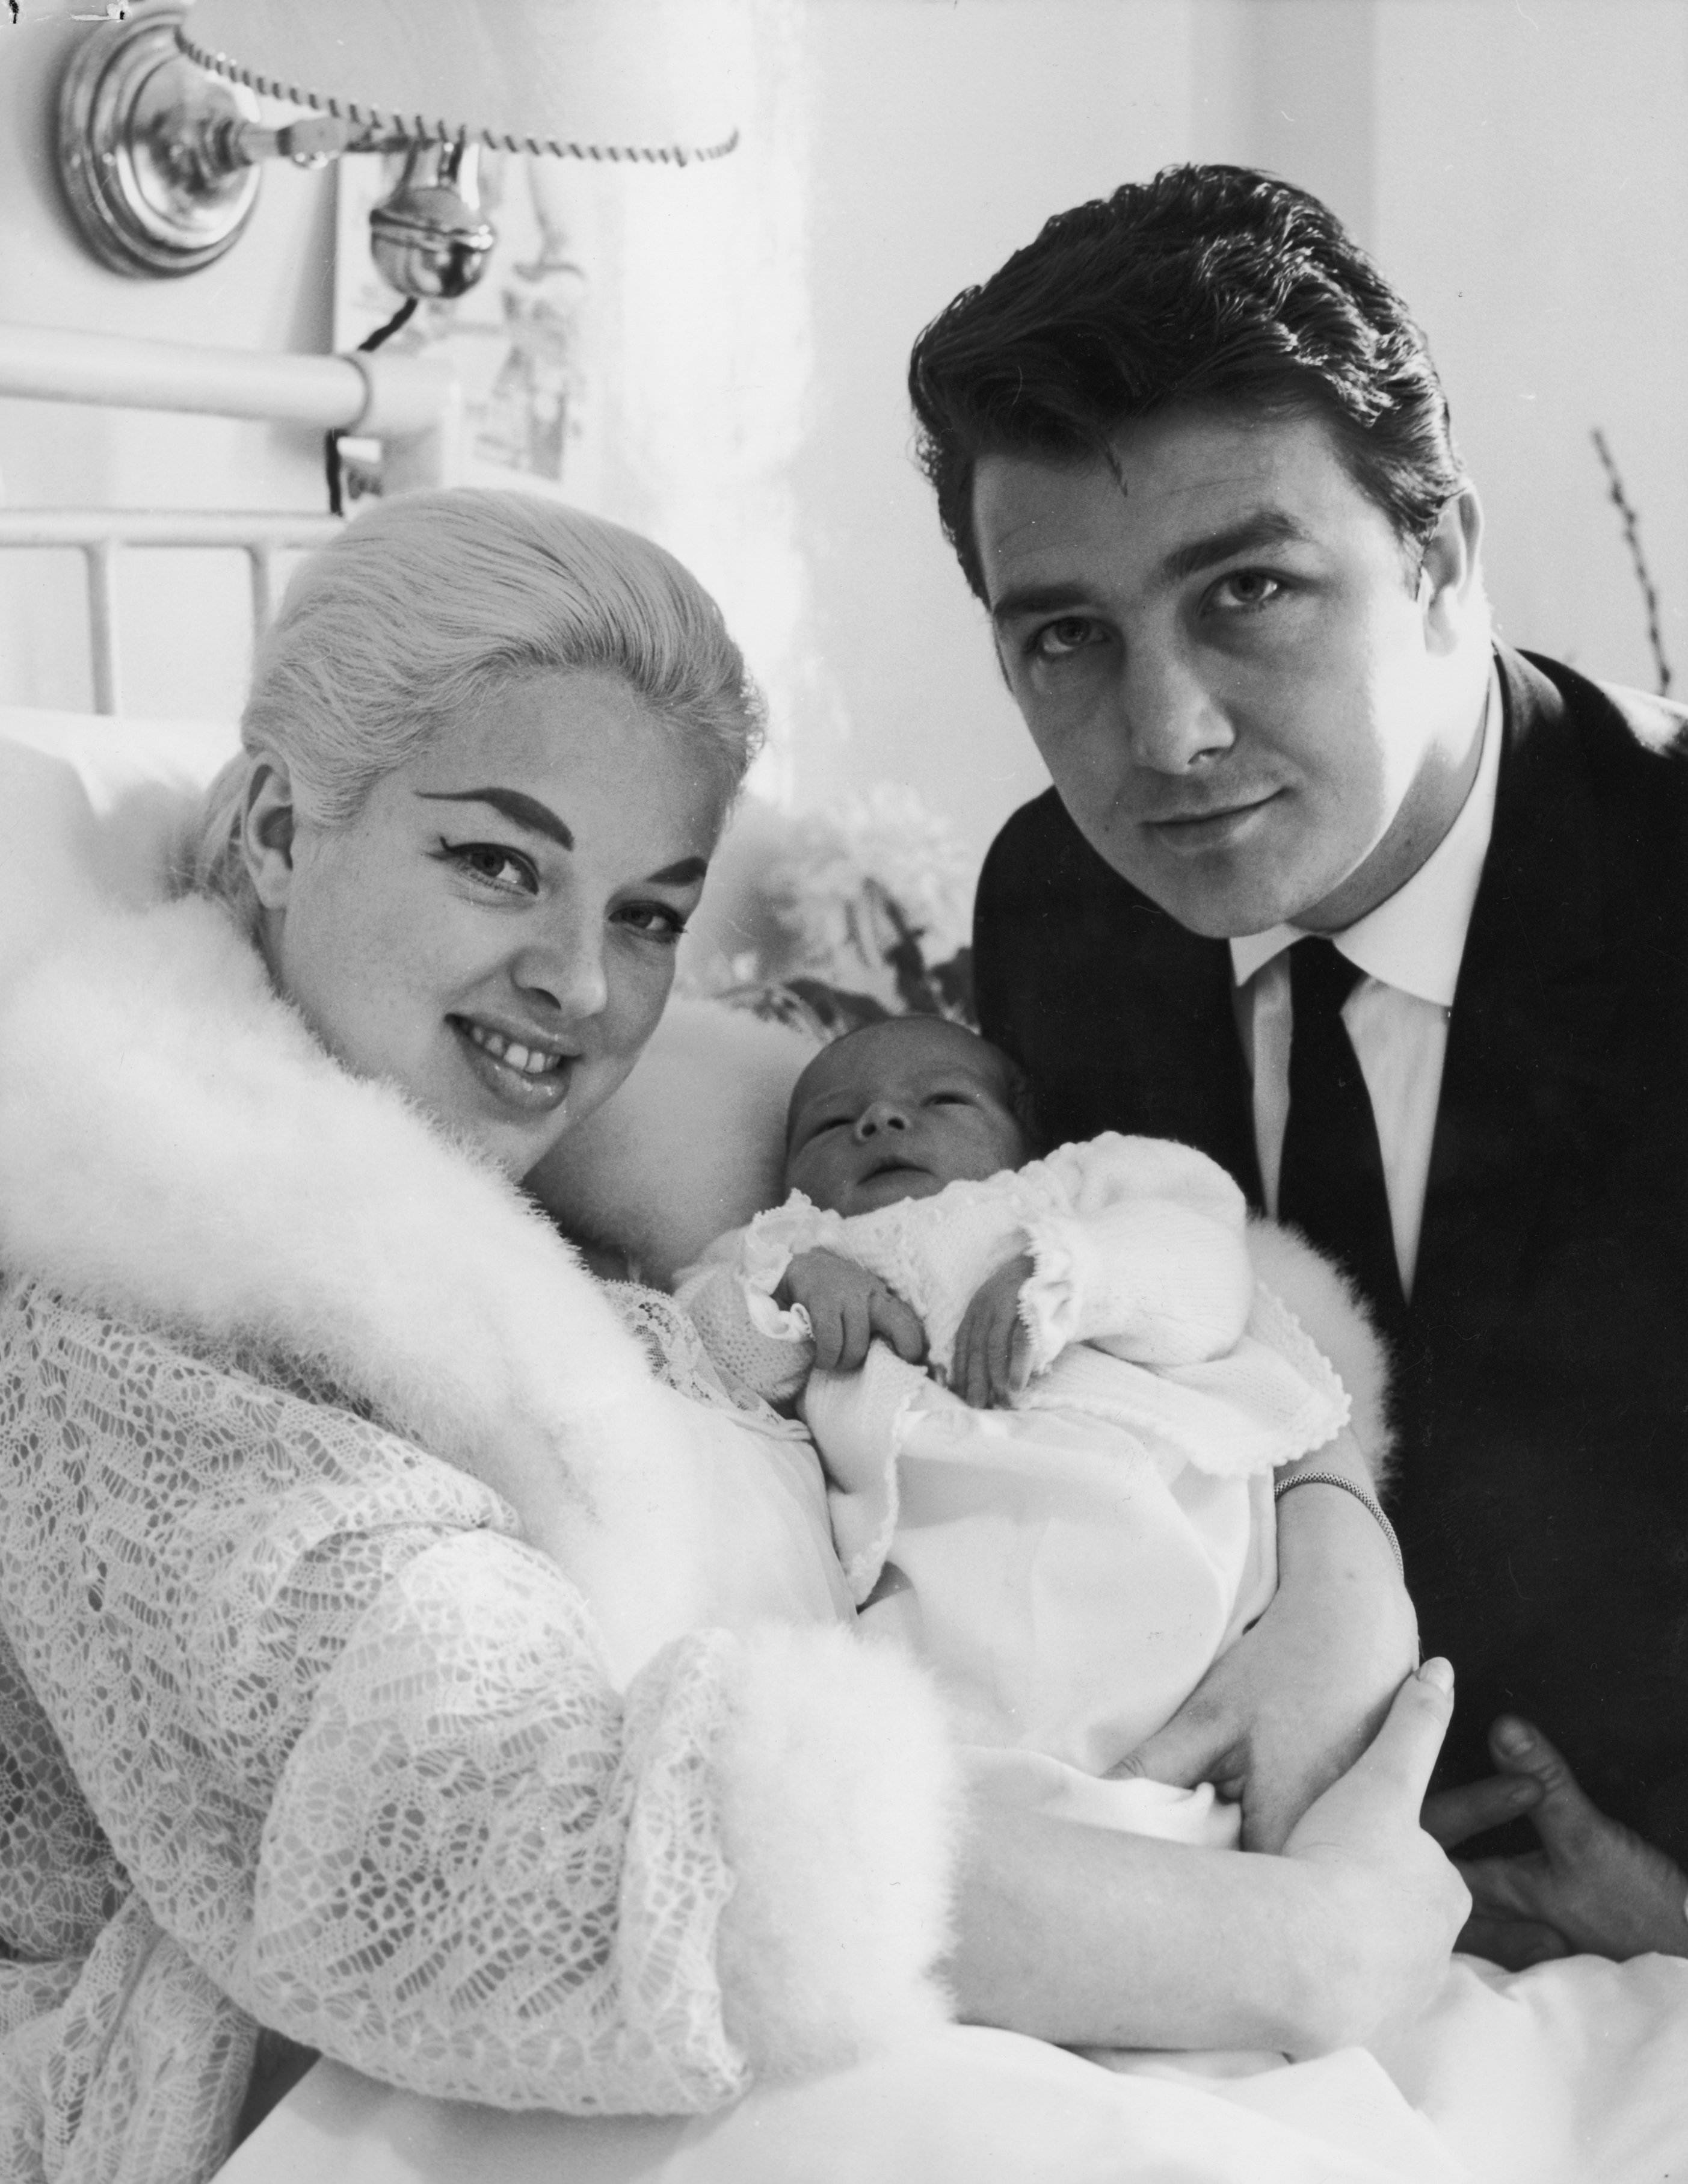 Diana Dors and Richard Dawson with their first baby, Mark, on February 9, 1960. | Source: Derek Berwin/Fox Photos/Getty Images